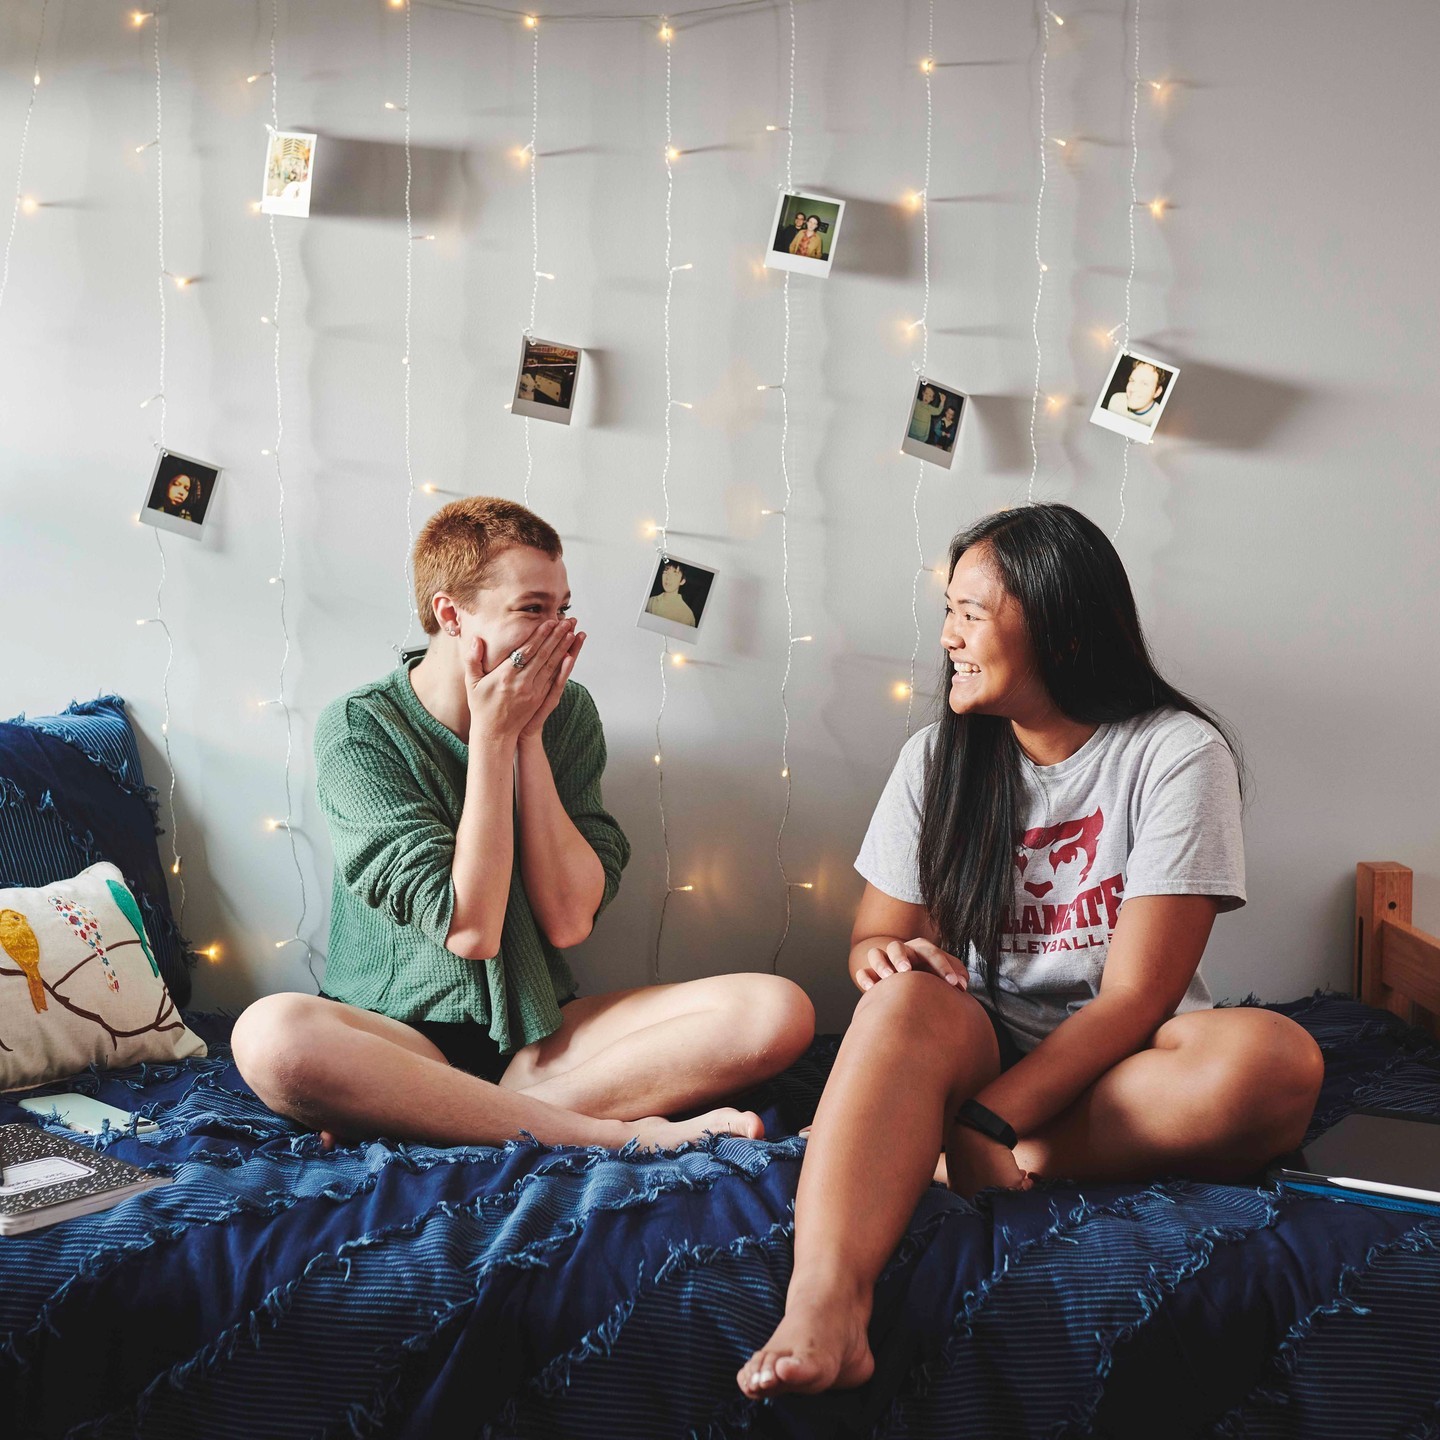 Two girls sitting on a dorm room bed smiling at each other. Photo by Instagram user @willamette_u